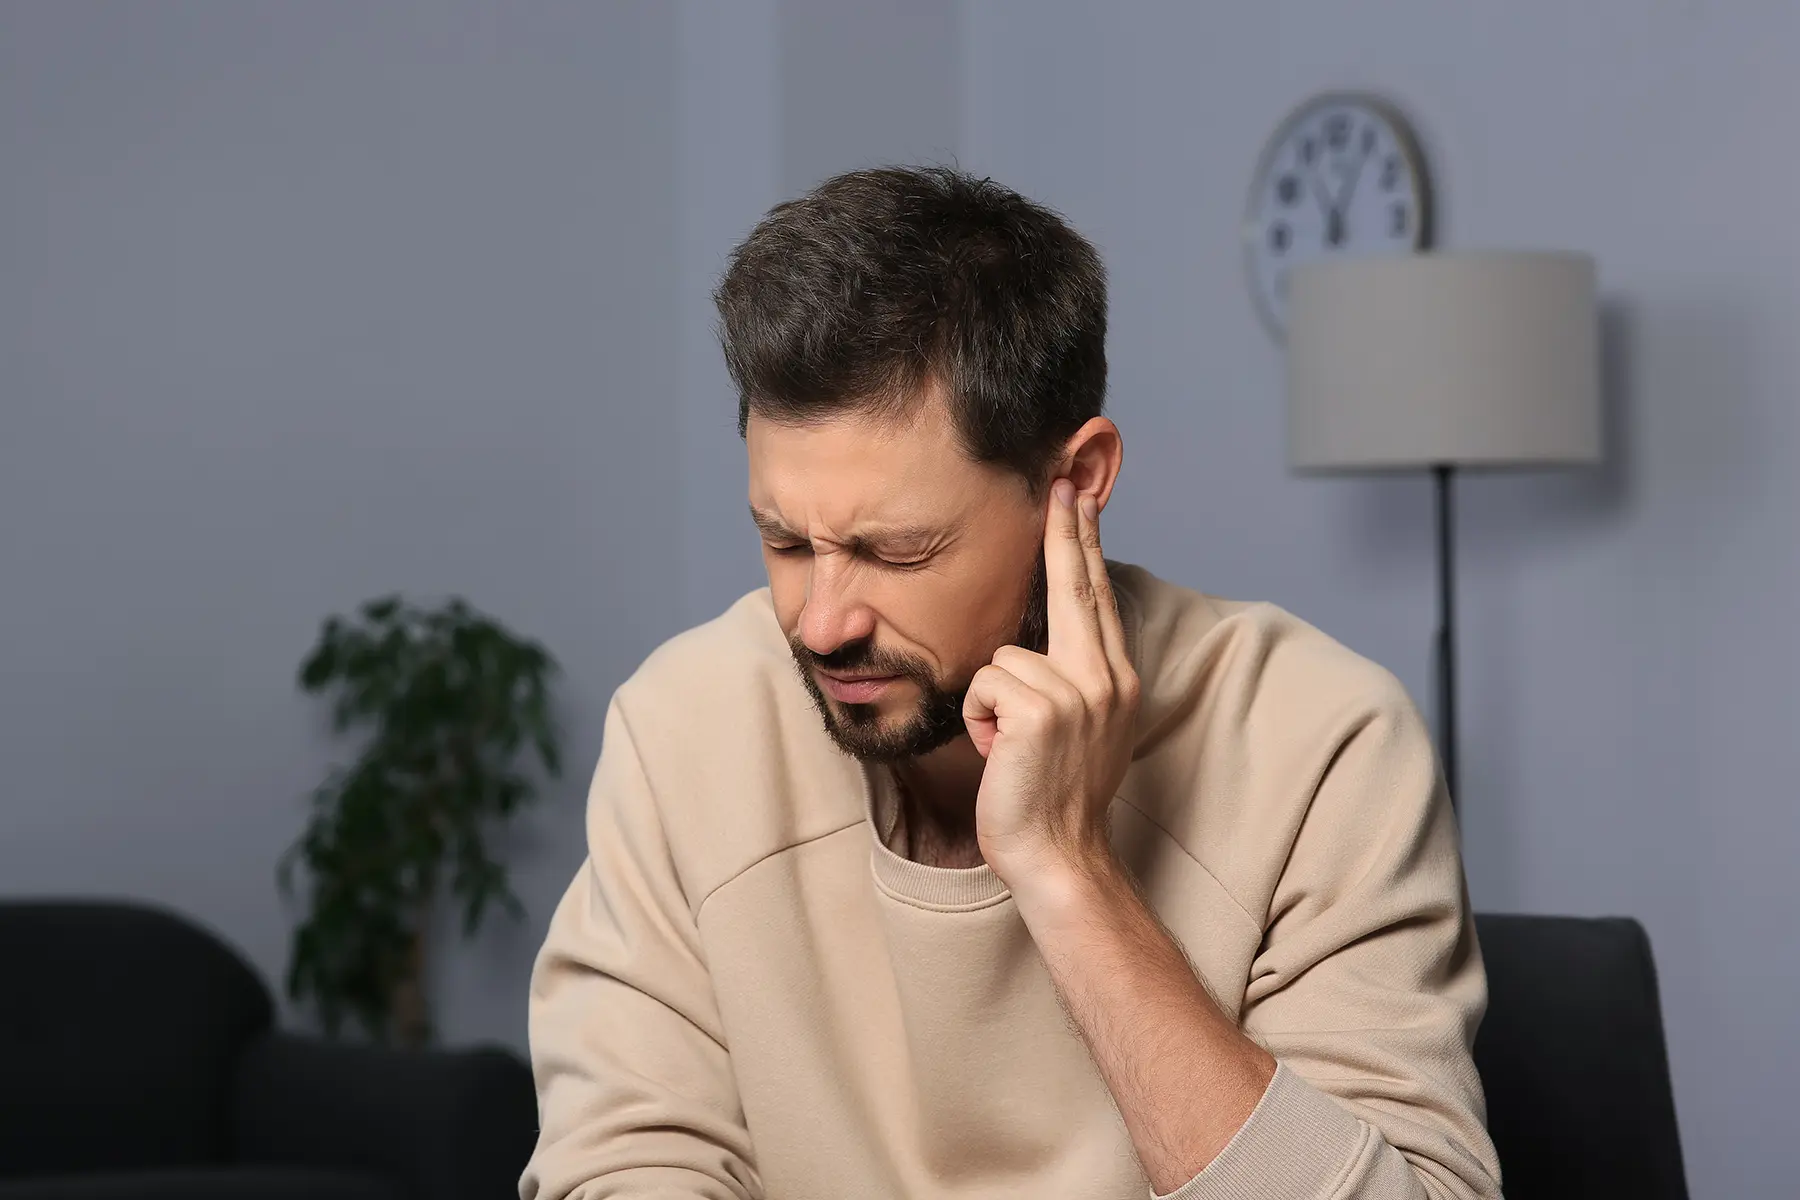 Man putting his fingers to his ear and wincing.